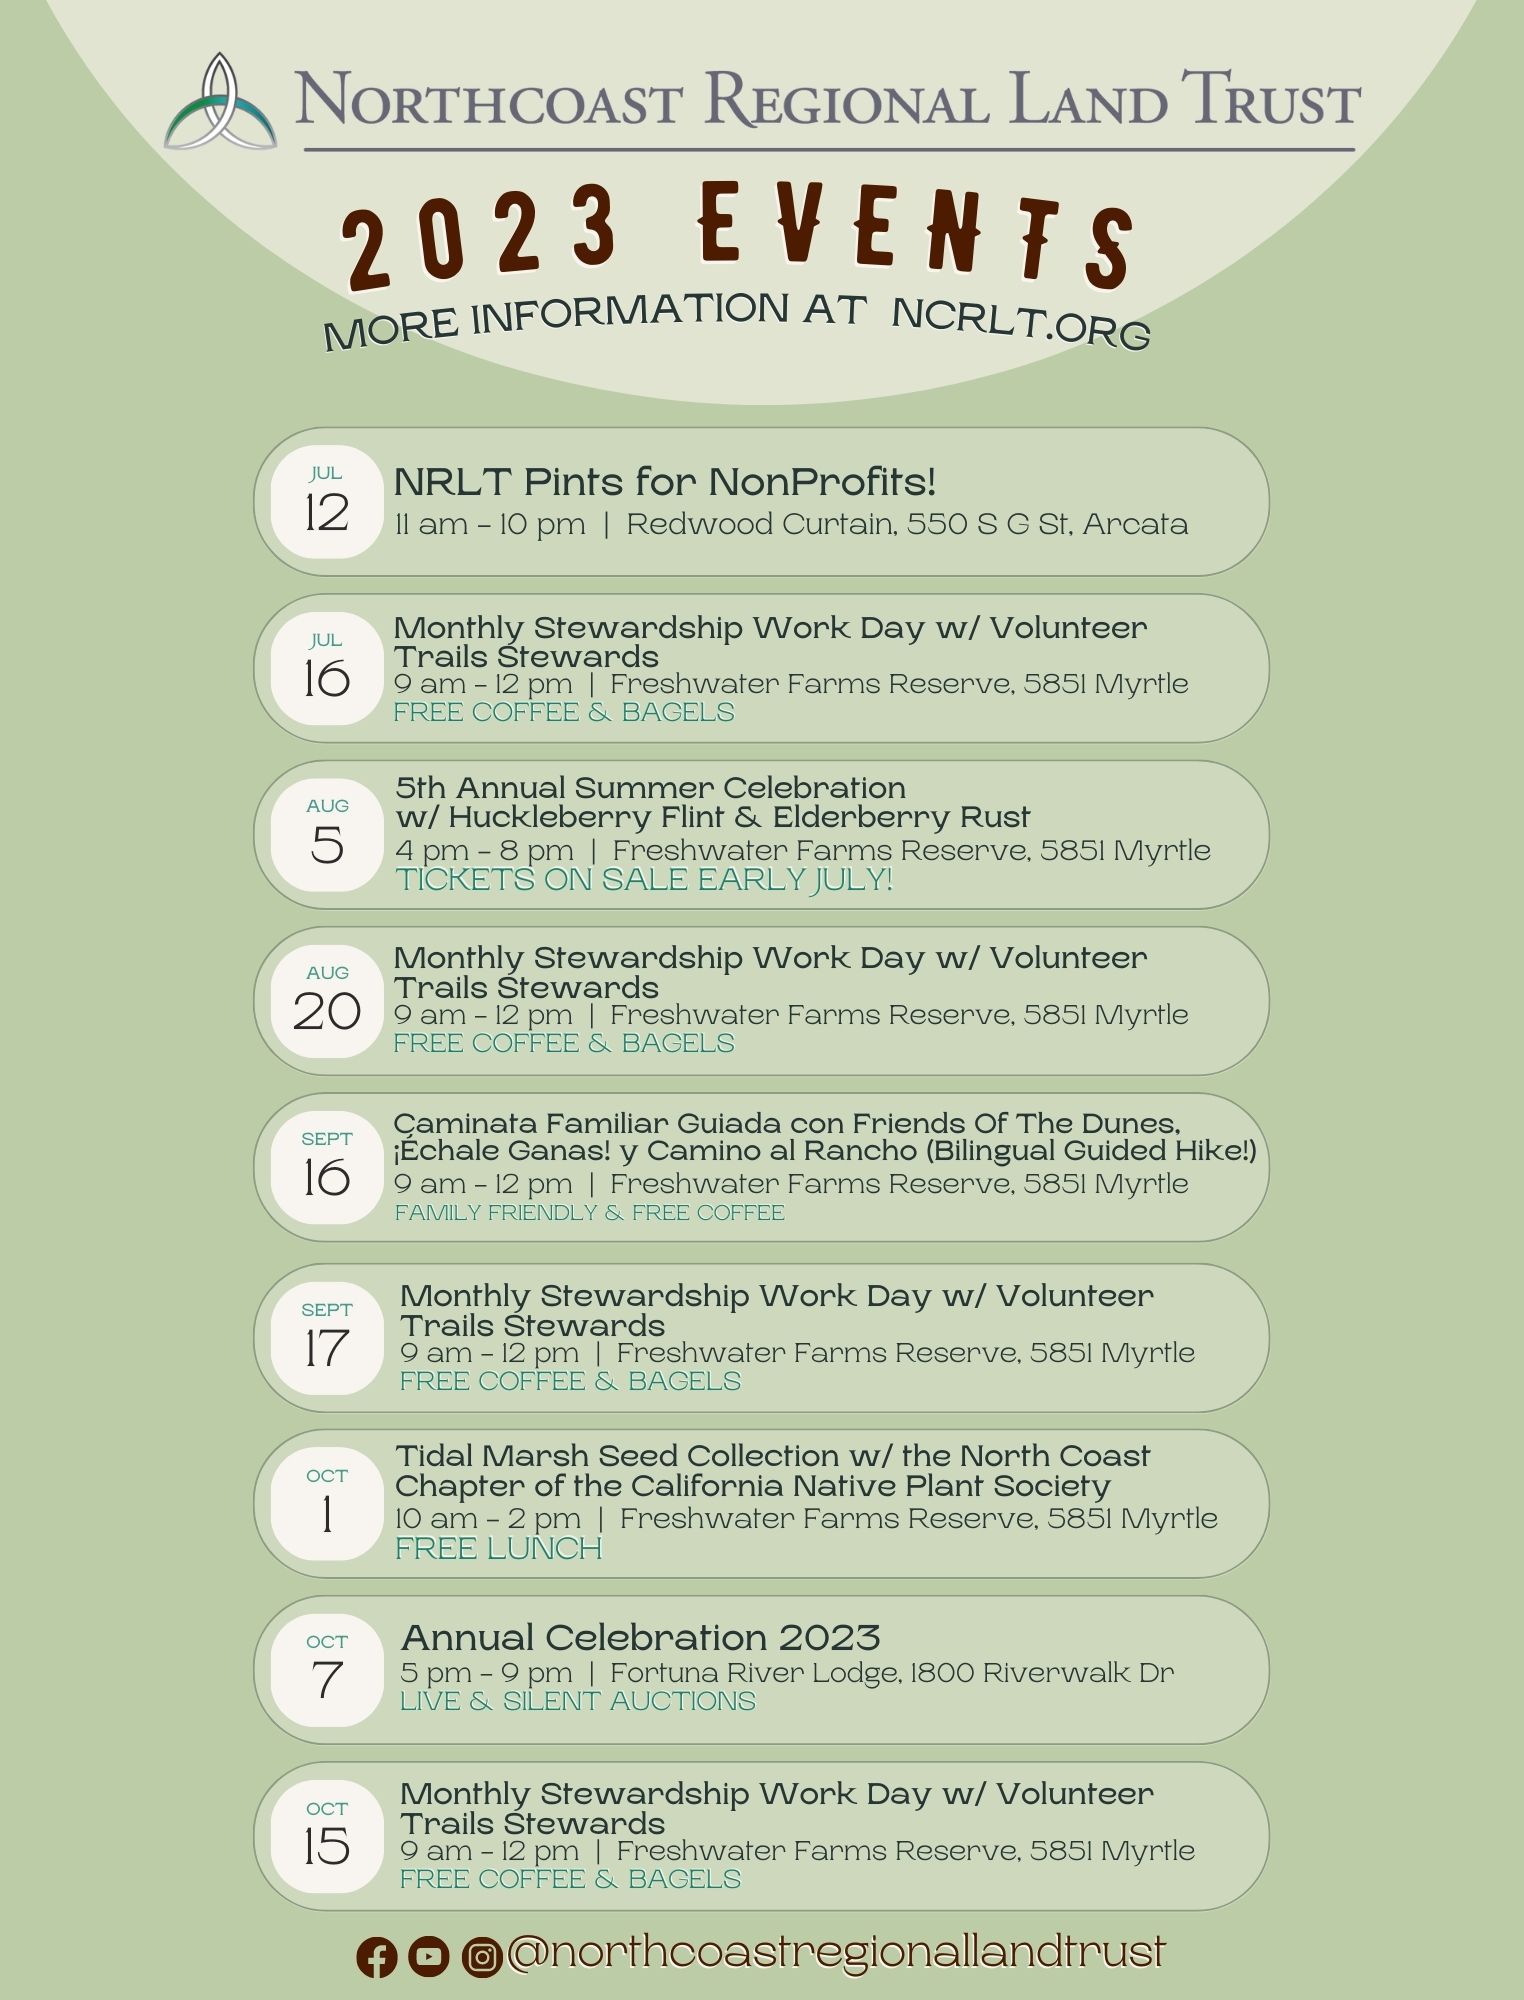 Calendar of events for NRLT in 2023; check out our events page for the contents here!